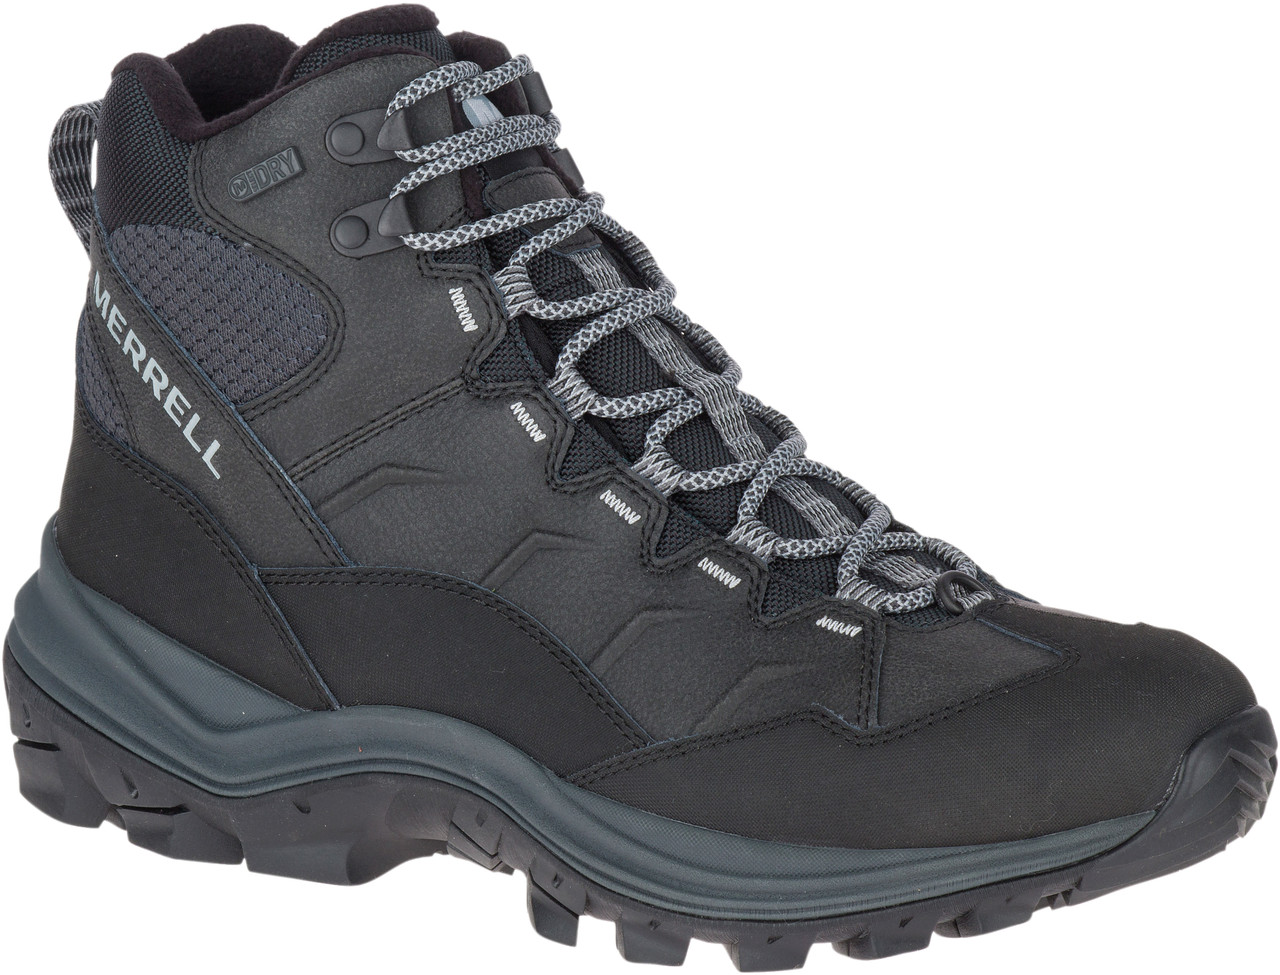 Merrell Men's Thermo Chill Mid Waterproof - FREE Shipping & FREE ...